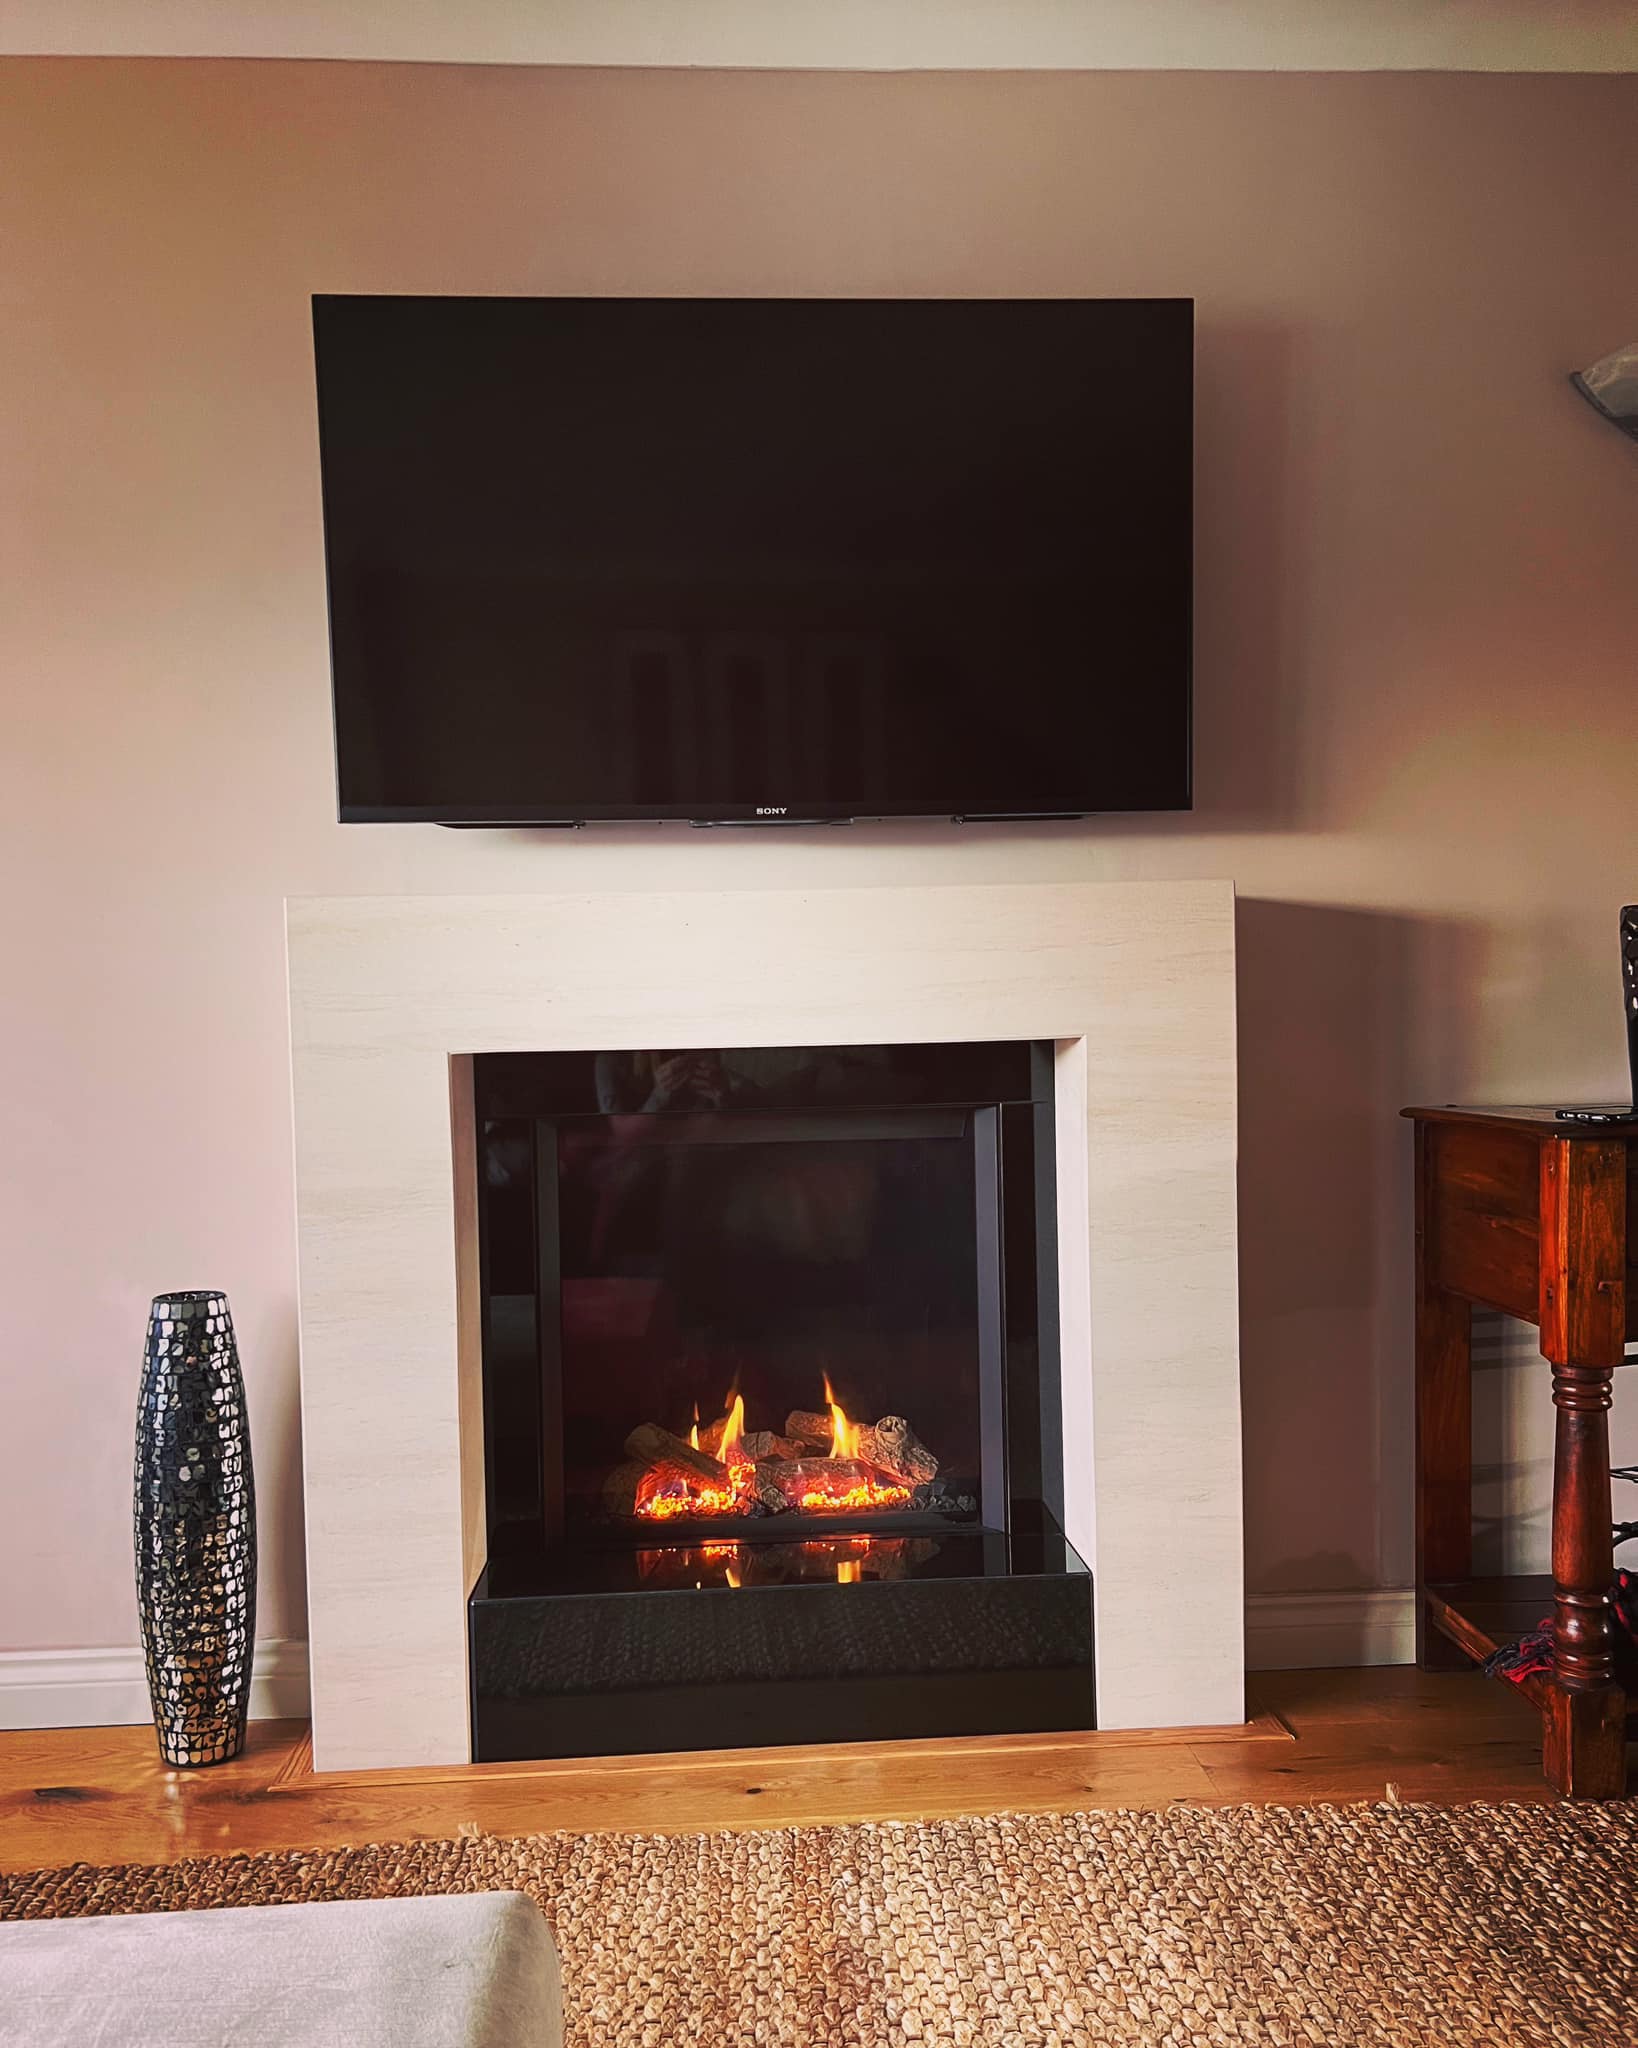 Gazco Riva 2 600 Hl Gas Fire With Fireplace Installed In North Wales